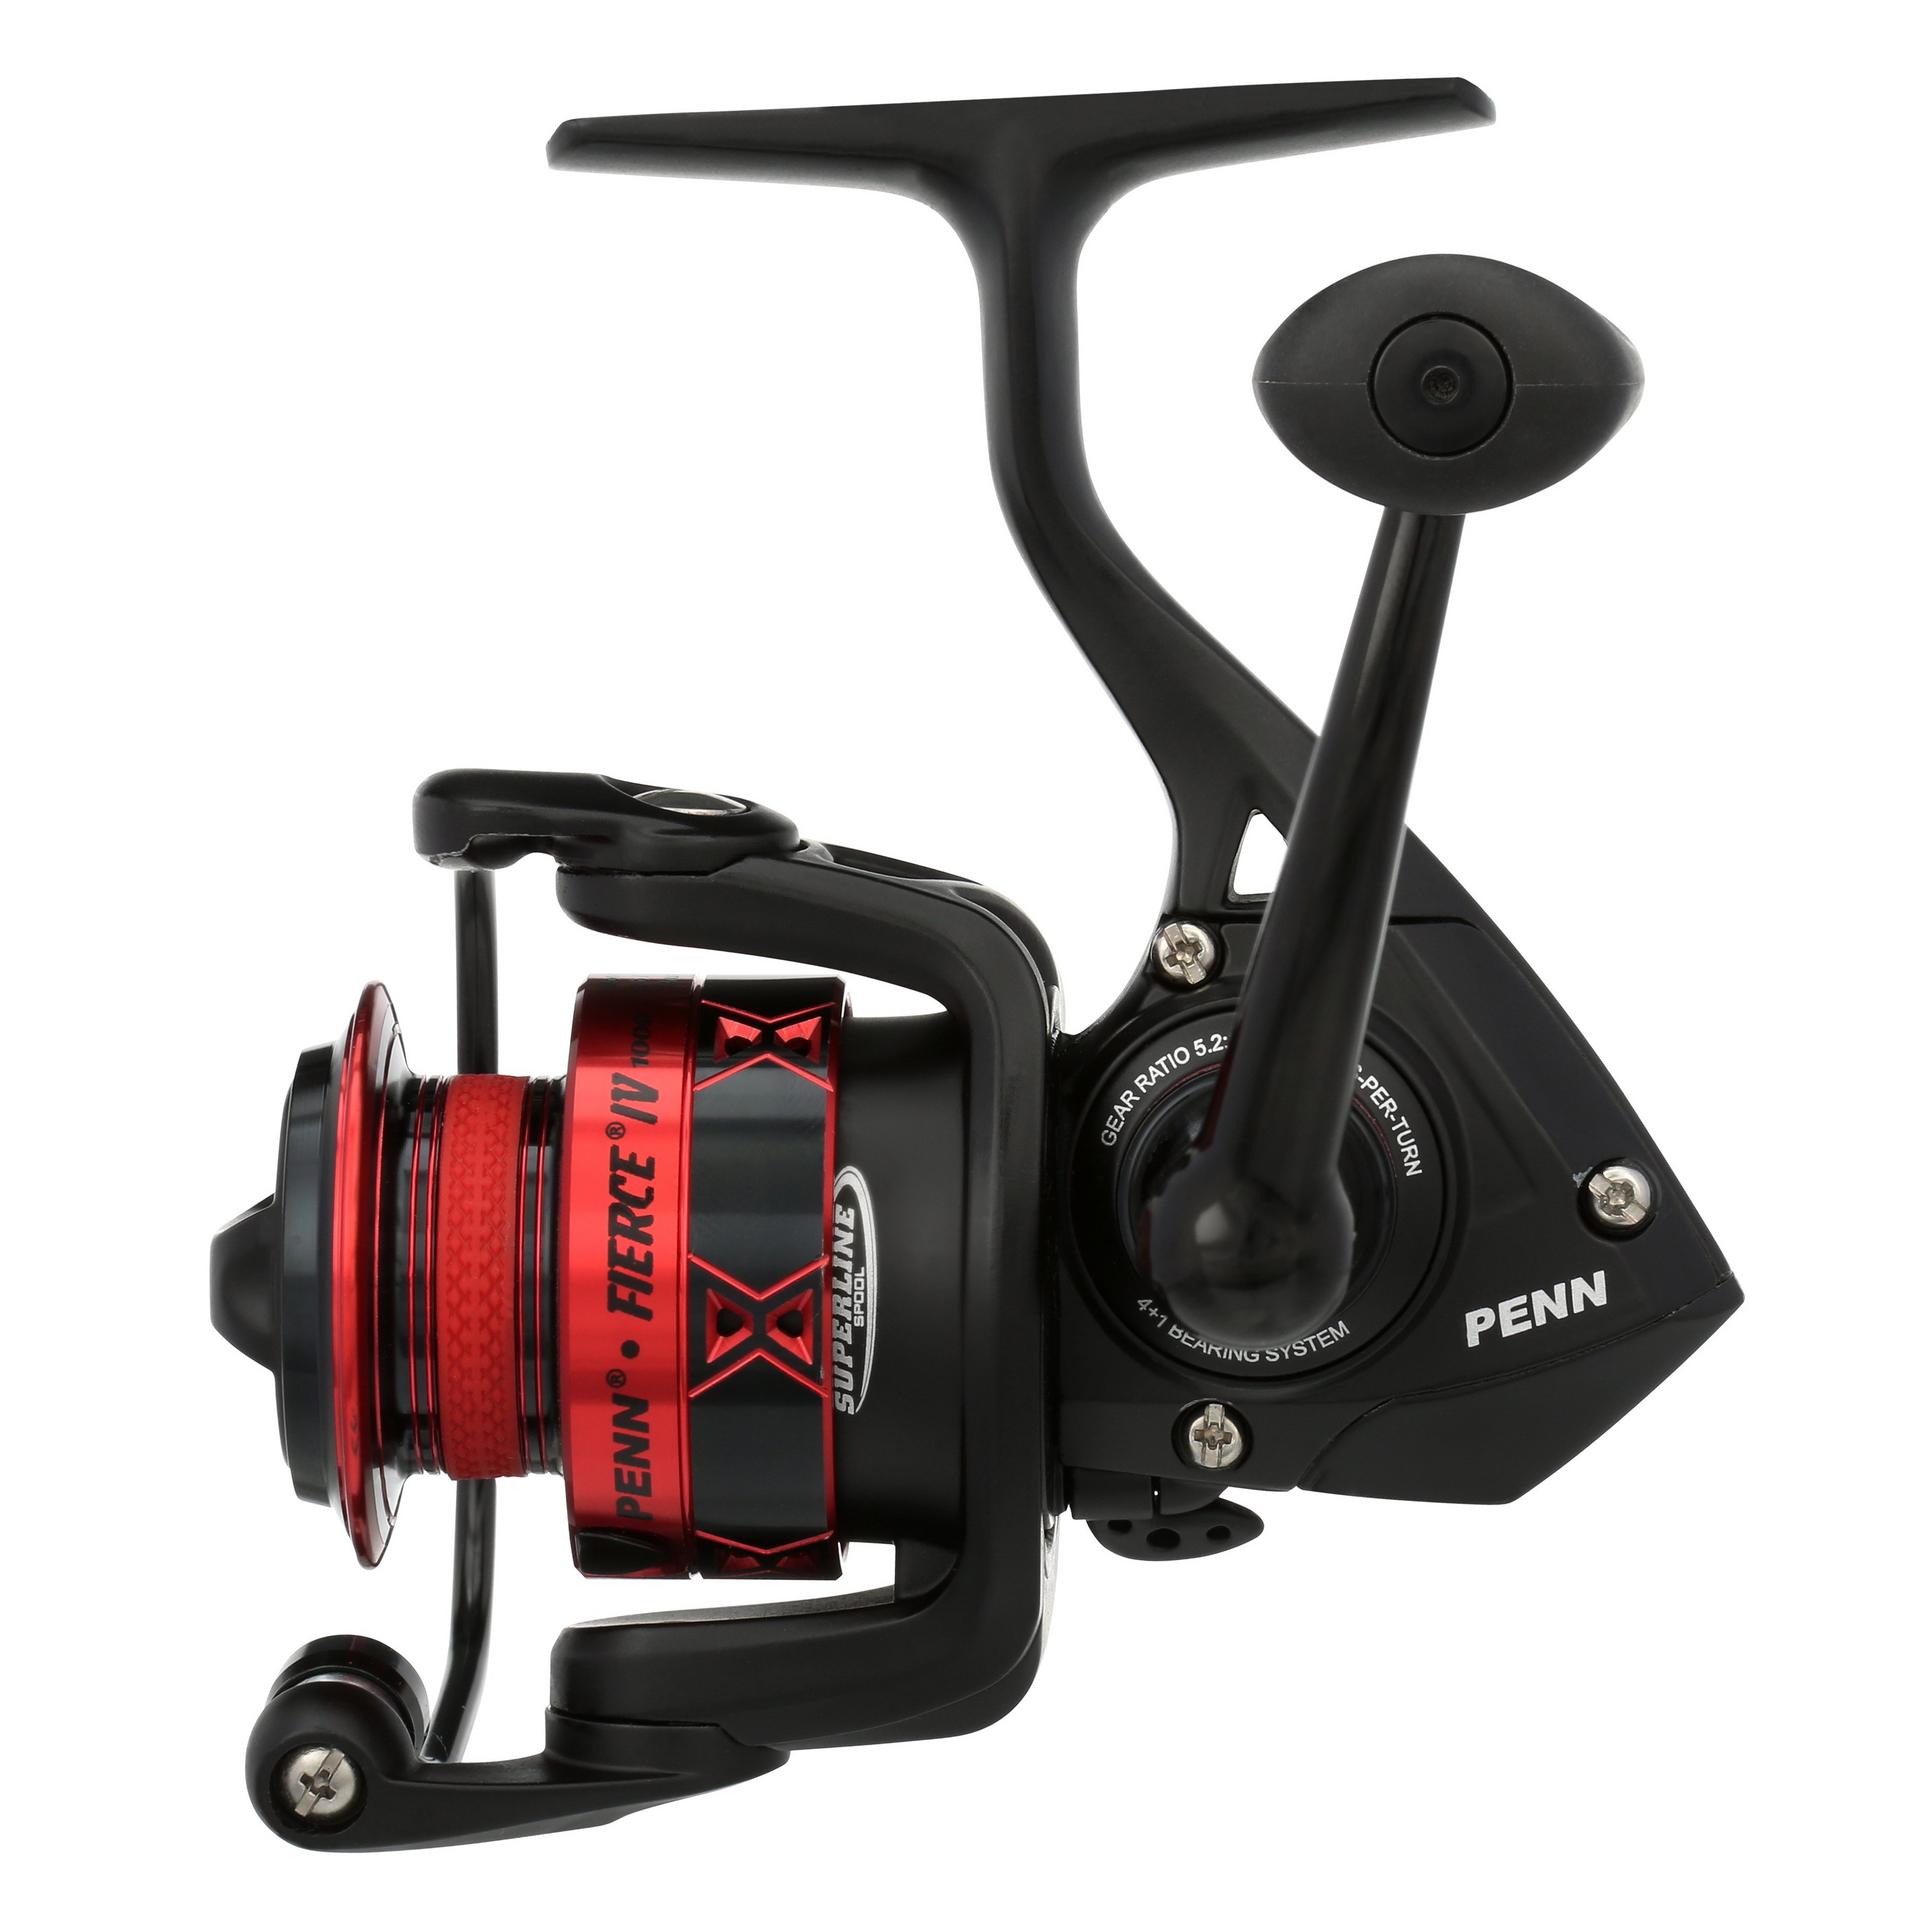 PENN Fierce III Spinning Inshore Fishing Reel， Size 2500， Right/Left Handle  Position， Front Drag for Smooth Operation， Saltwater Fishing Reel，並行輸入